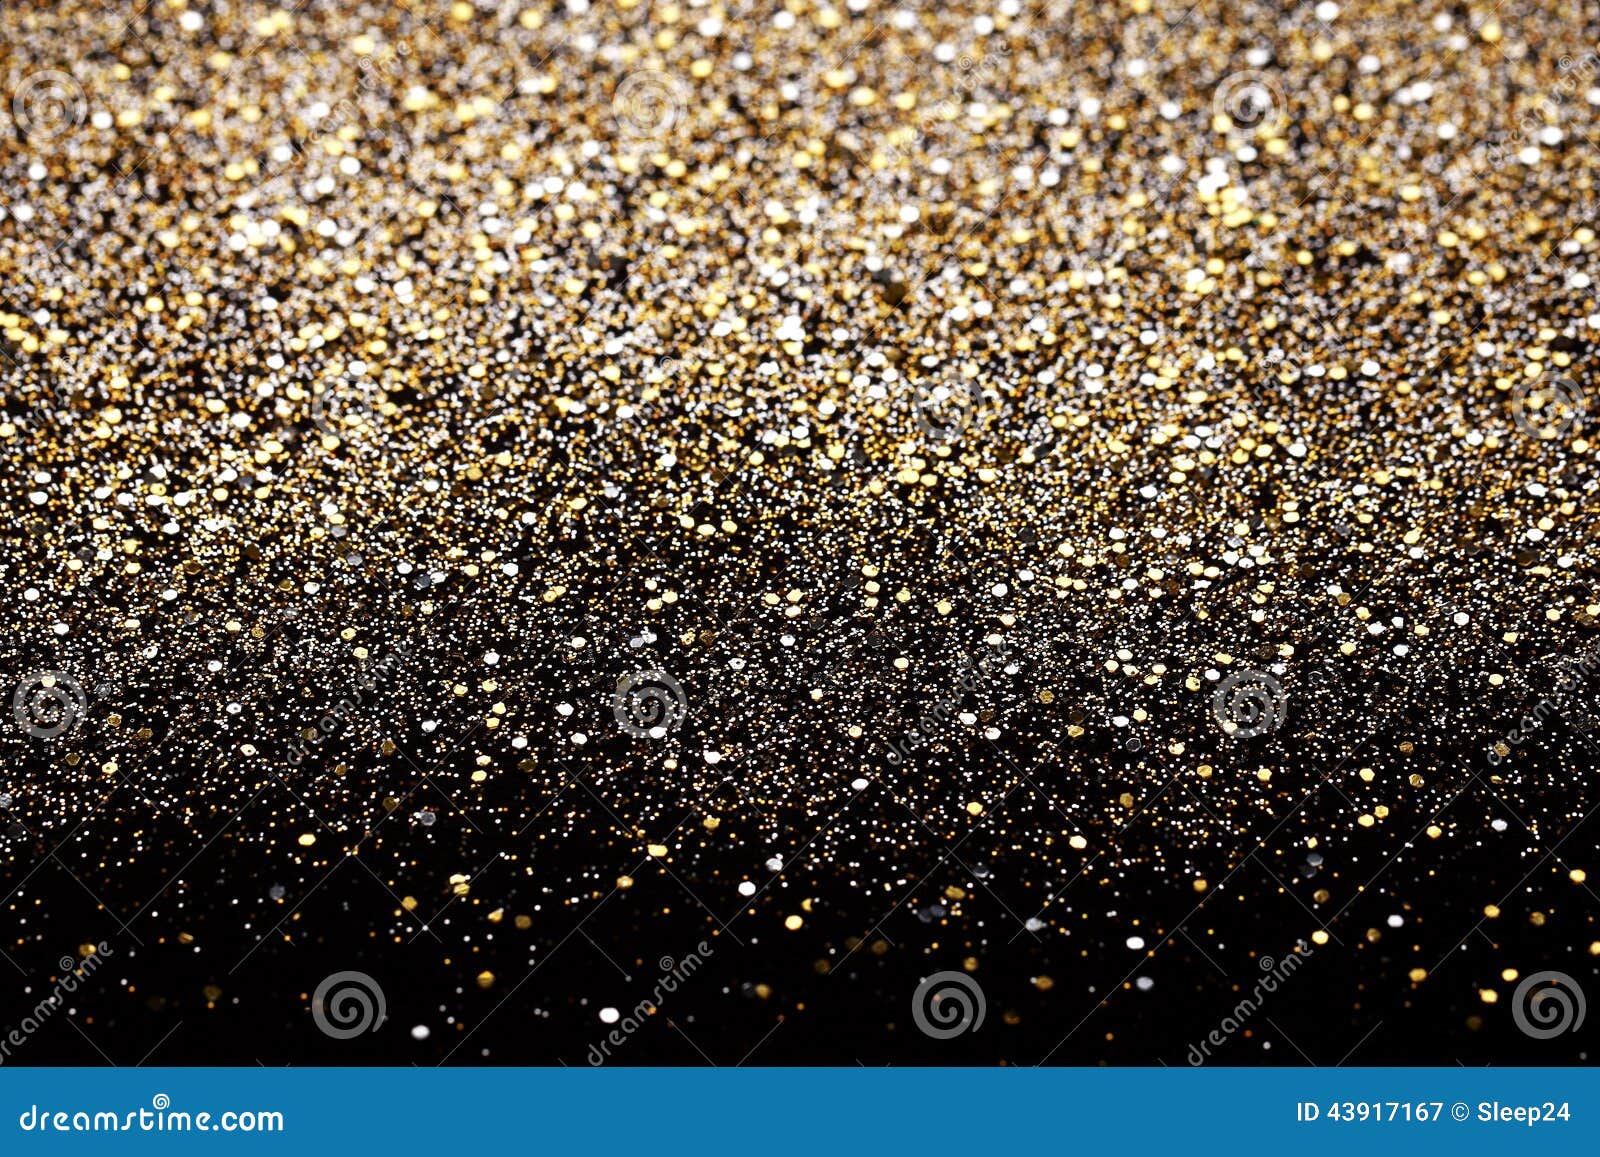 christmas new year black and gold glitter background. holiday abstract texture fabric